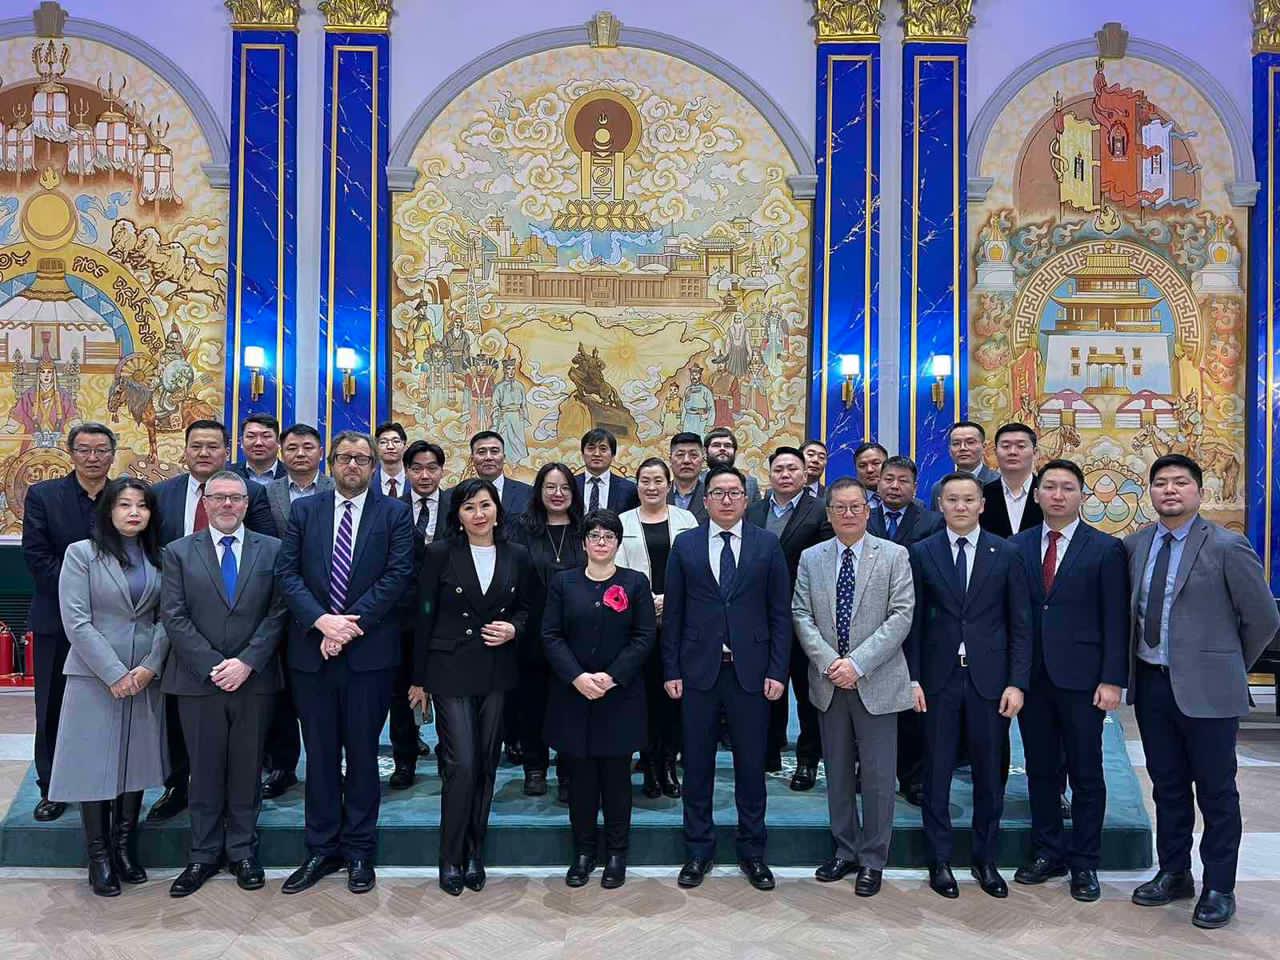 A Conference on Strategic Trade Controls in Ulaanbaatar